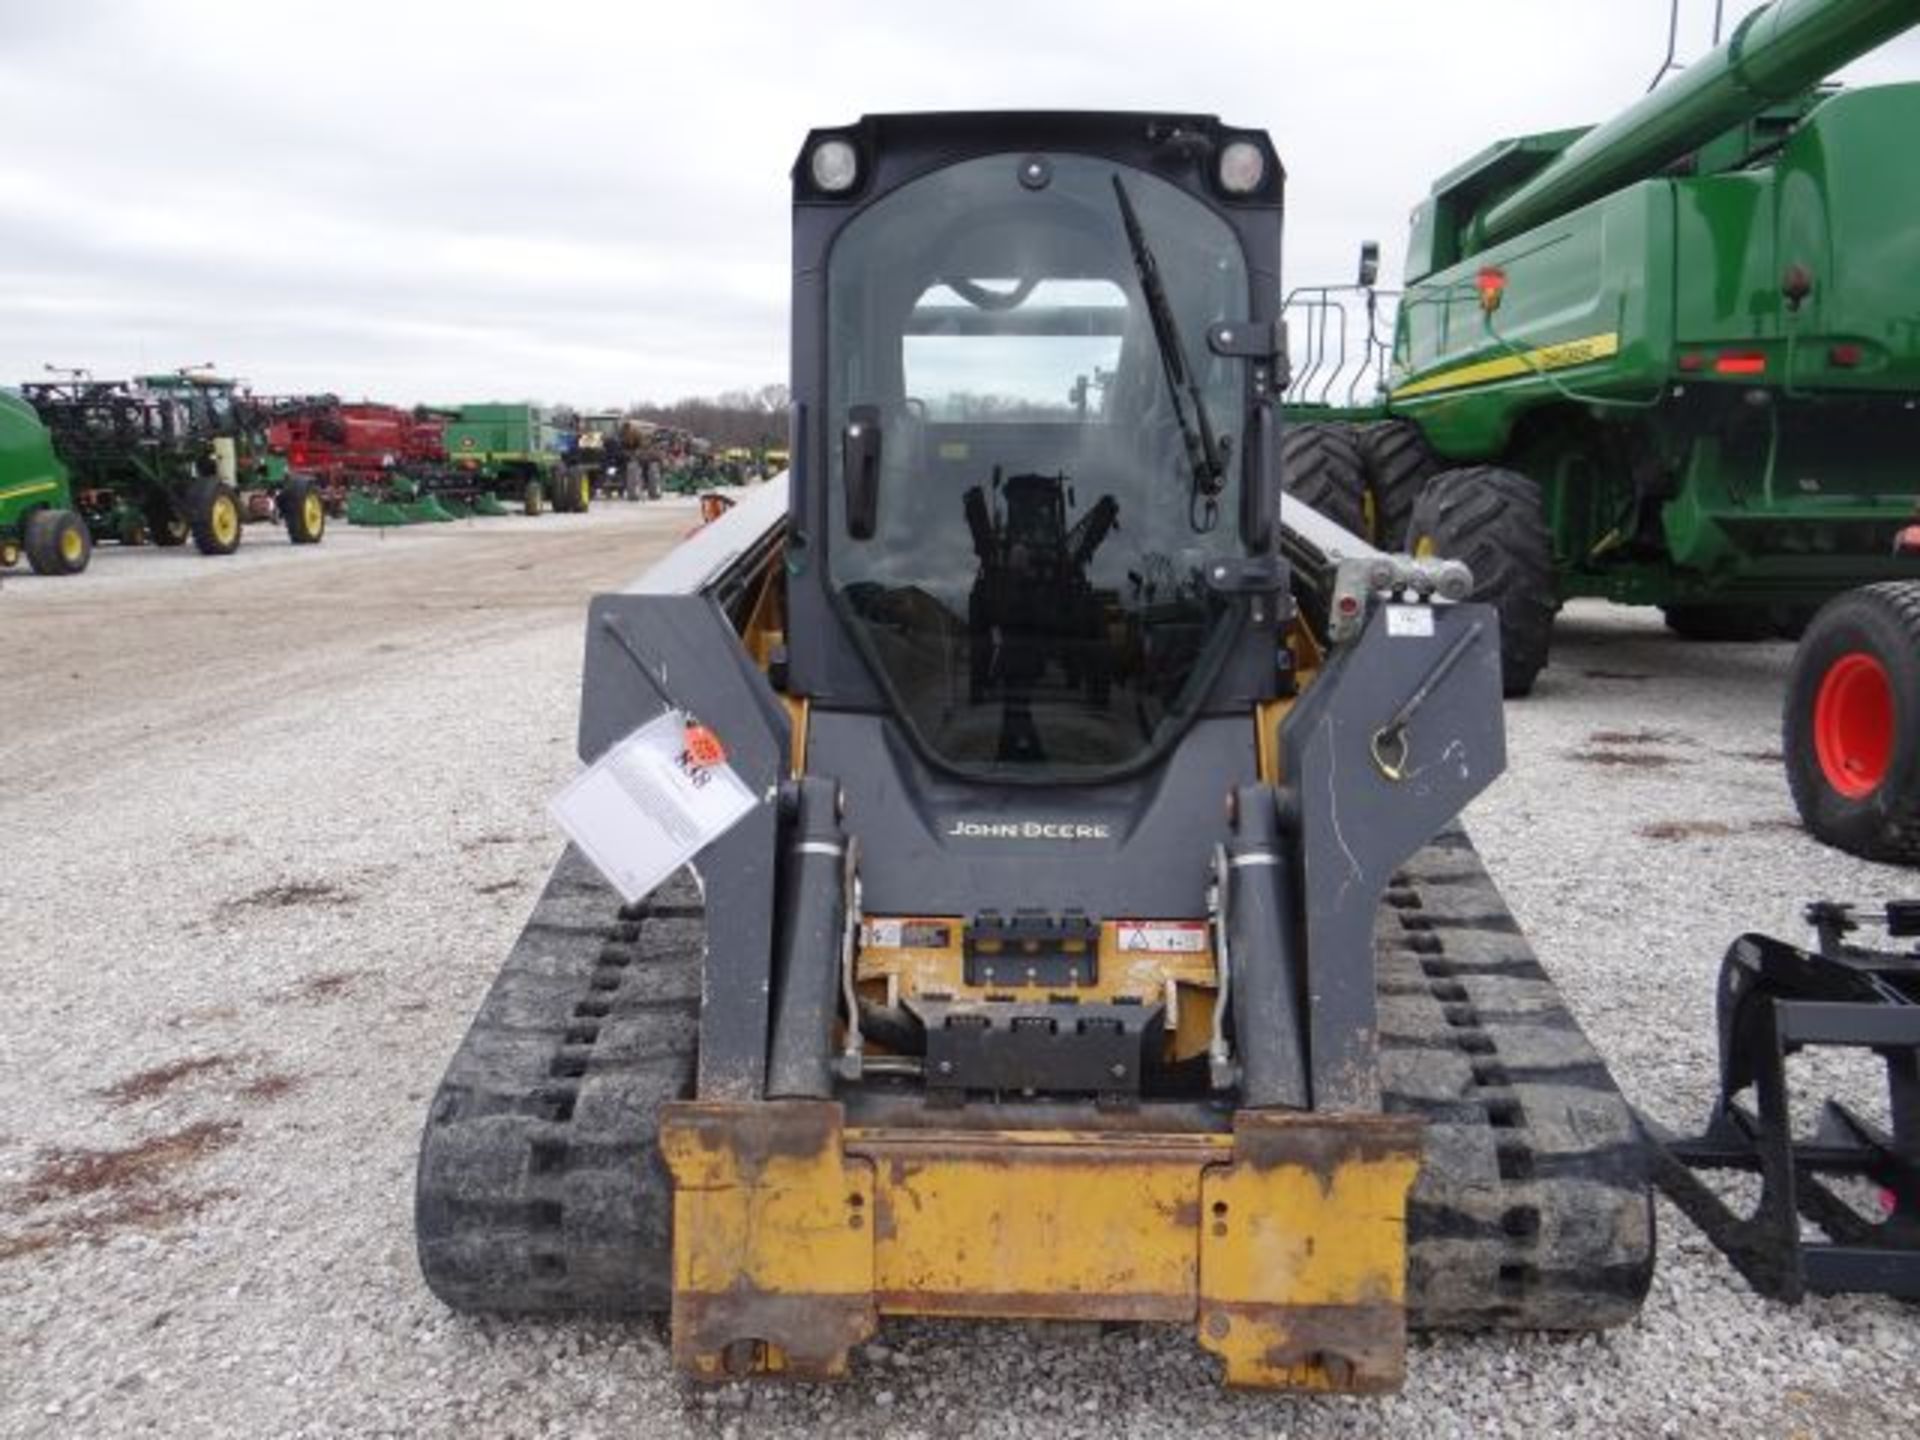 JD 333E Skid Steer, 2015 #64033, CTL, Cab w/ Ac and Heat, Switchable EH Foot-H-ISO Pattern - Image 4 of 6